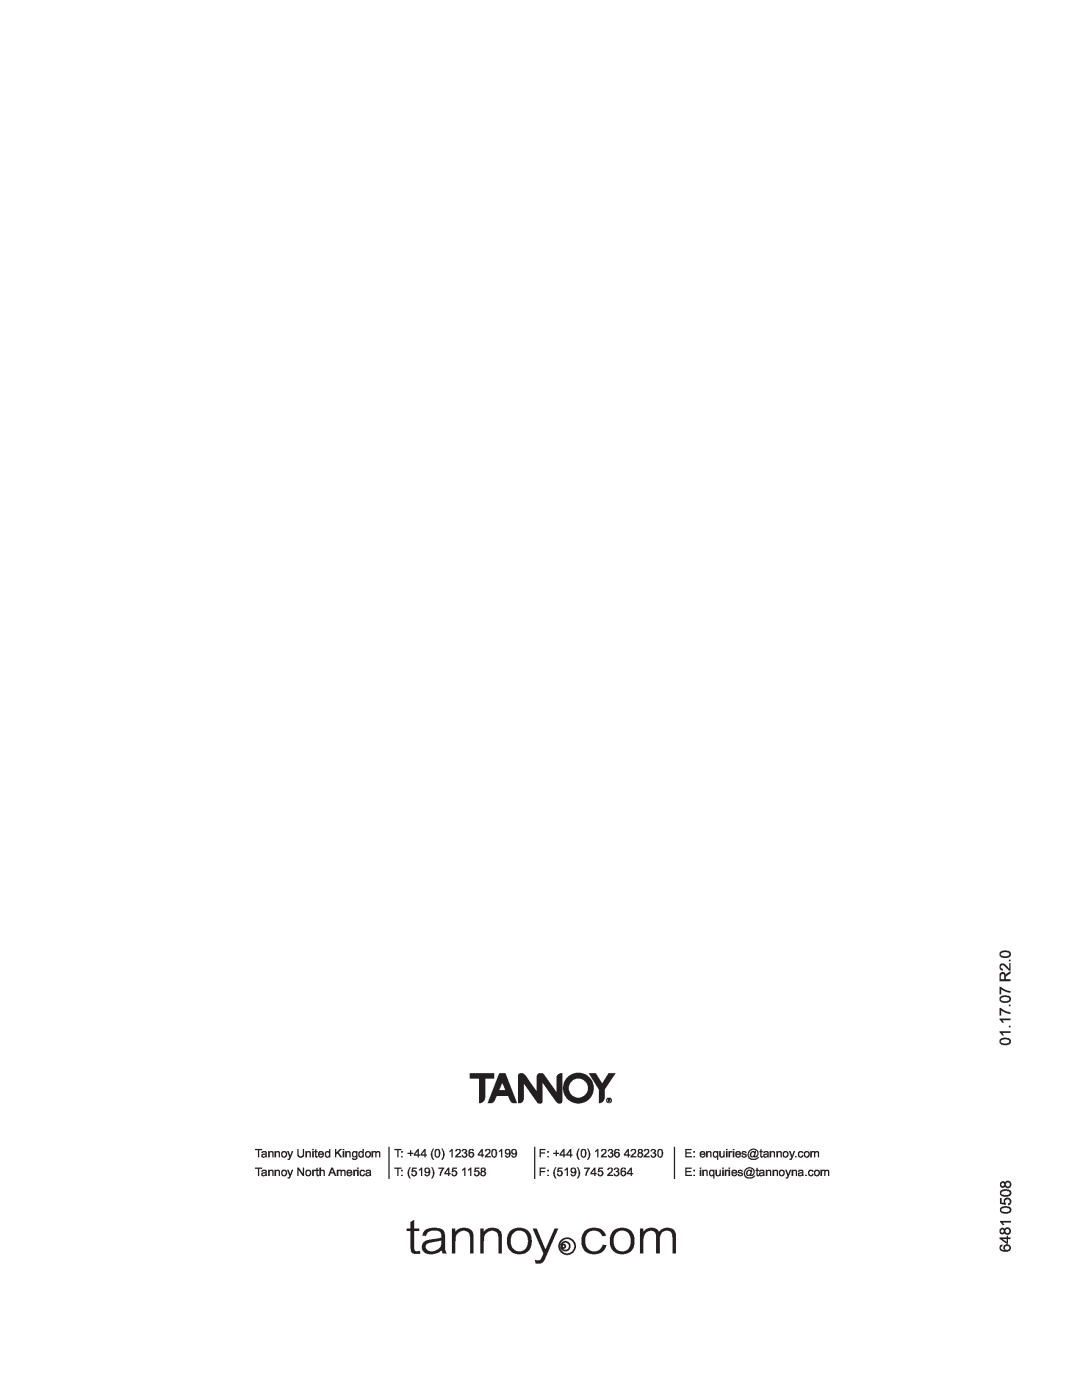 TOA Electronics SR601 owner manual 6481, Tannoy United Kingdom, T +44, F +44, Tannoy North America 